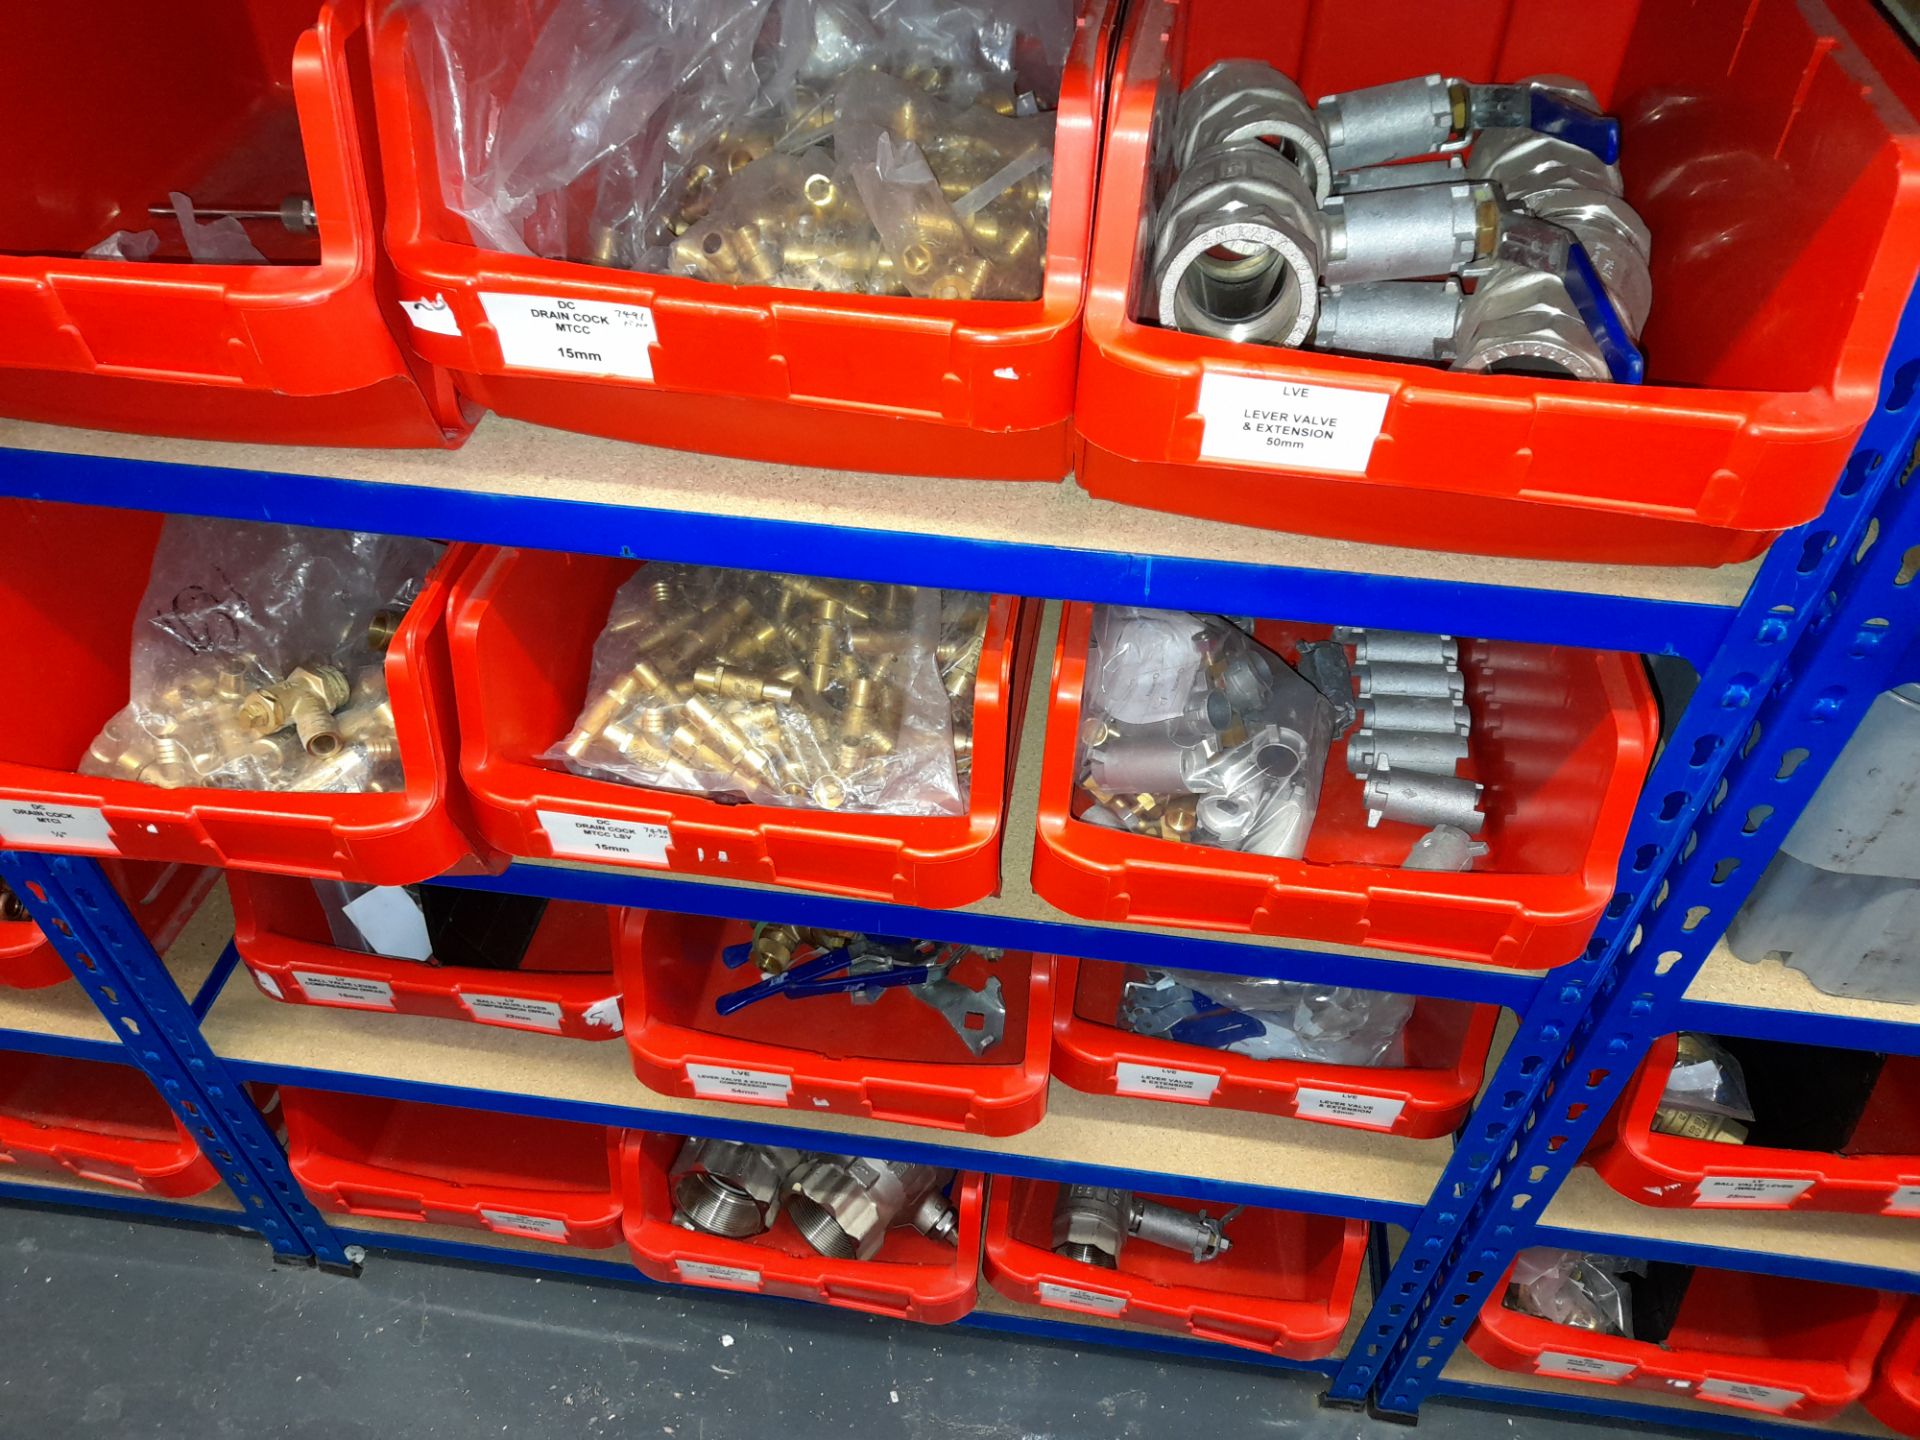 Large Quantity of stock to 2 bays including ball valve levers, (various sizes), stop cock taps ( - Image 10 of 11